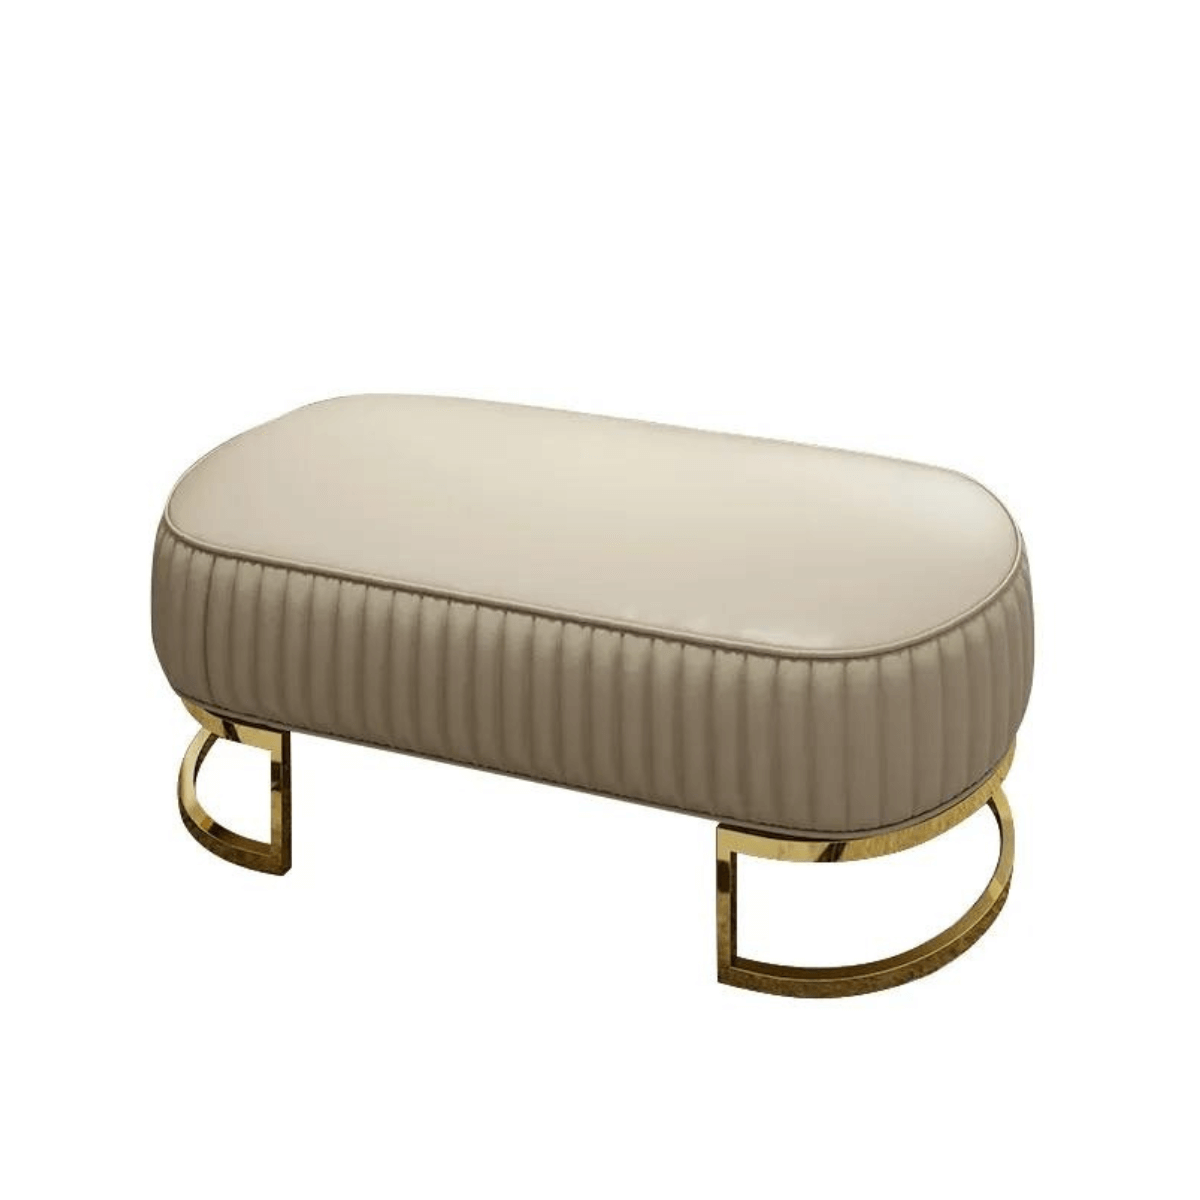 Shell Leather Oval Bench with Golden Half-moon Base 10